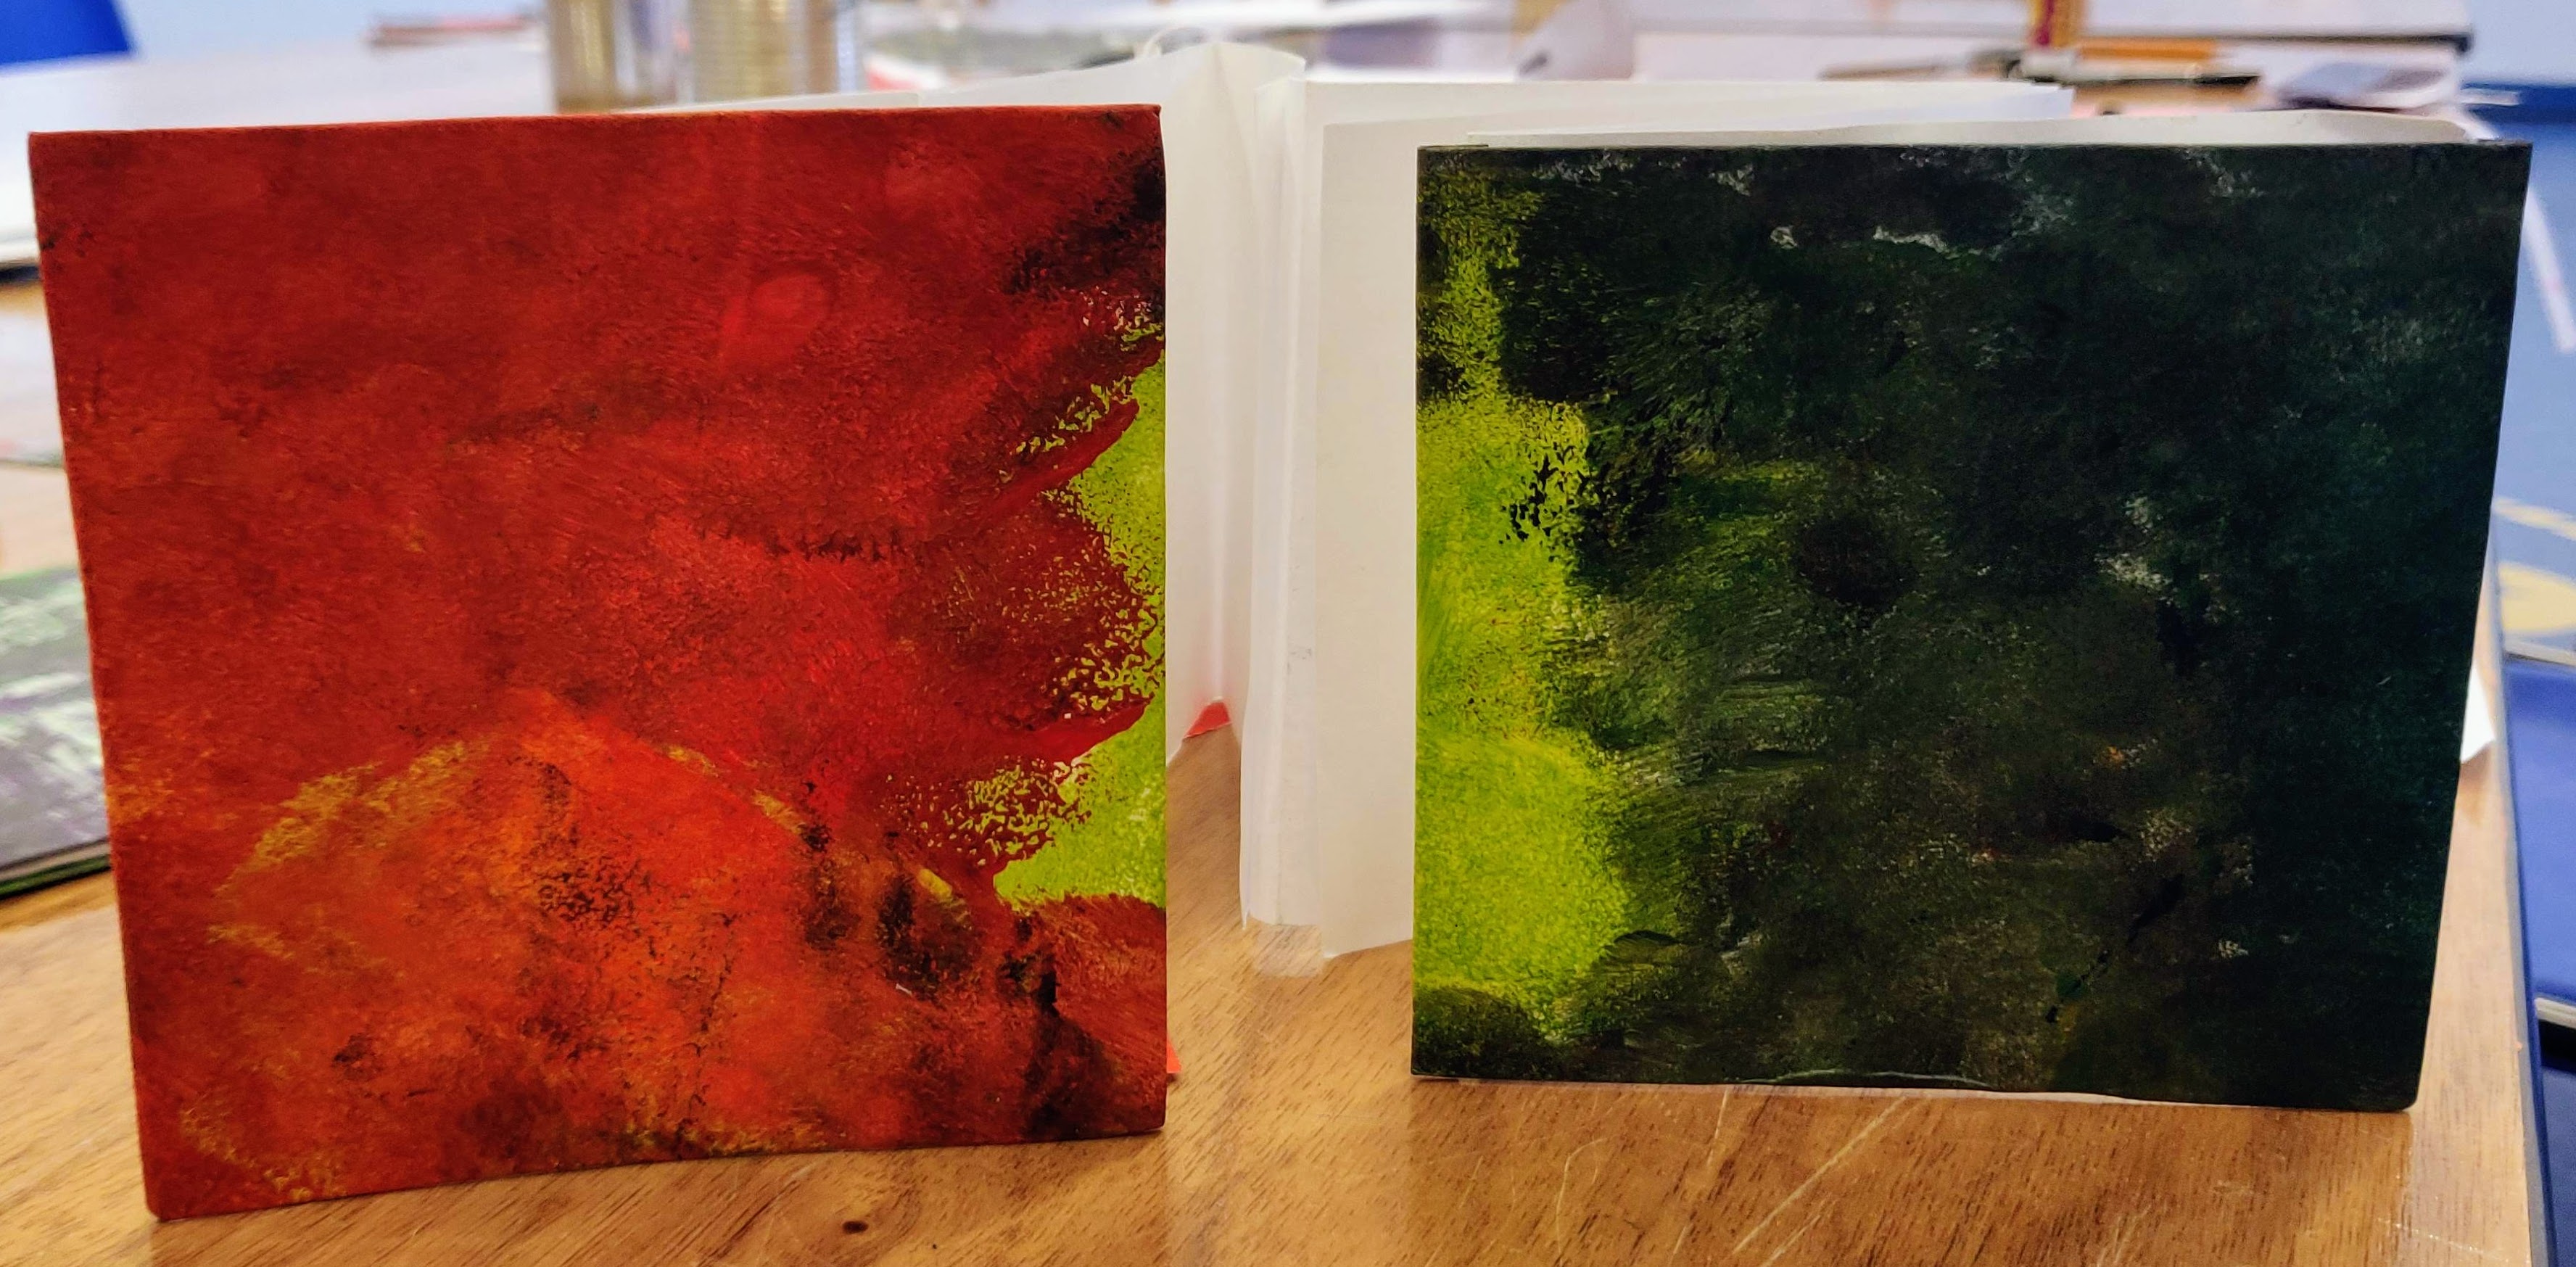 Our summer sketchbook we designed the covers doing a series of abstract small paintings!